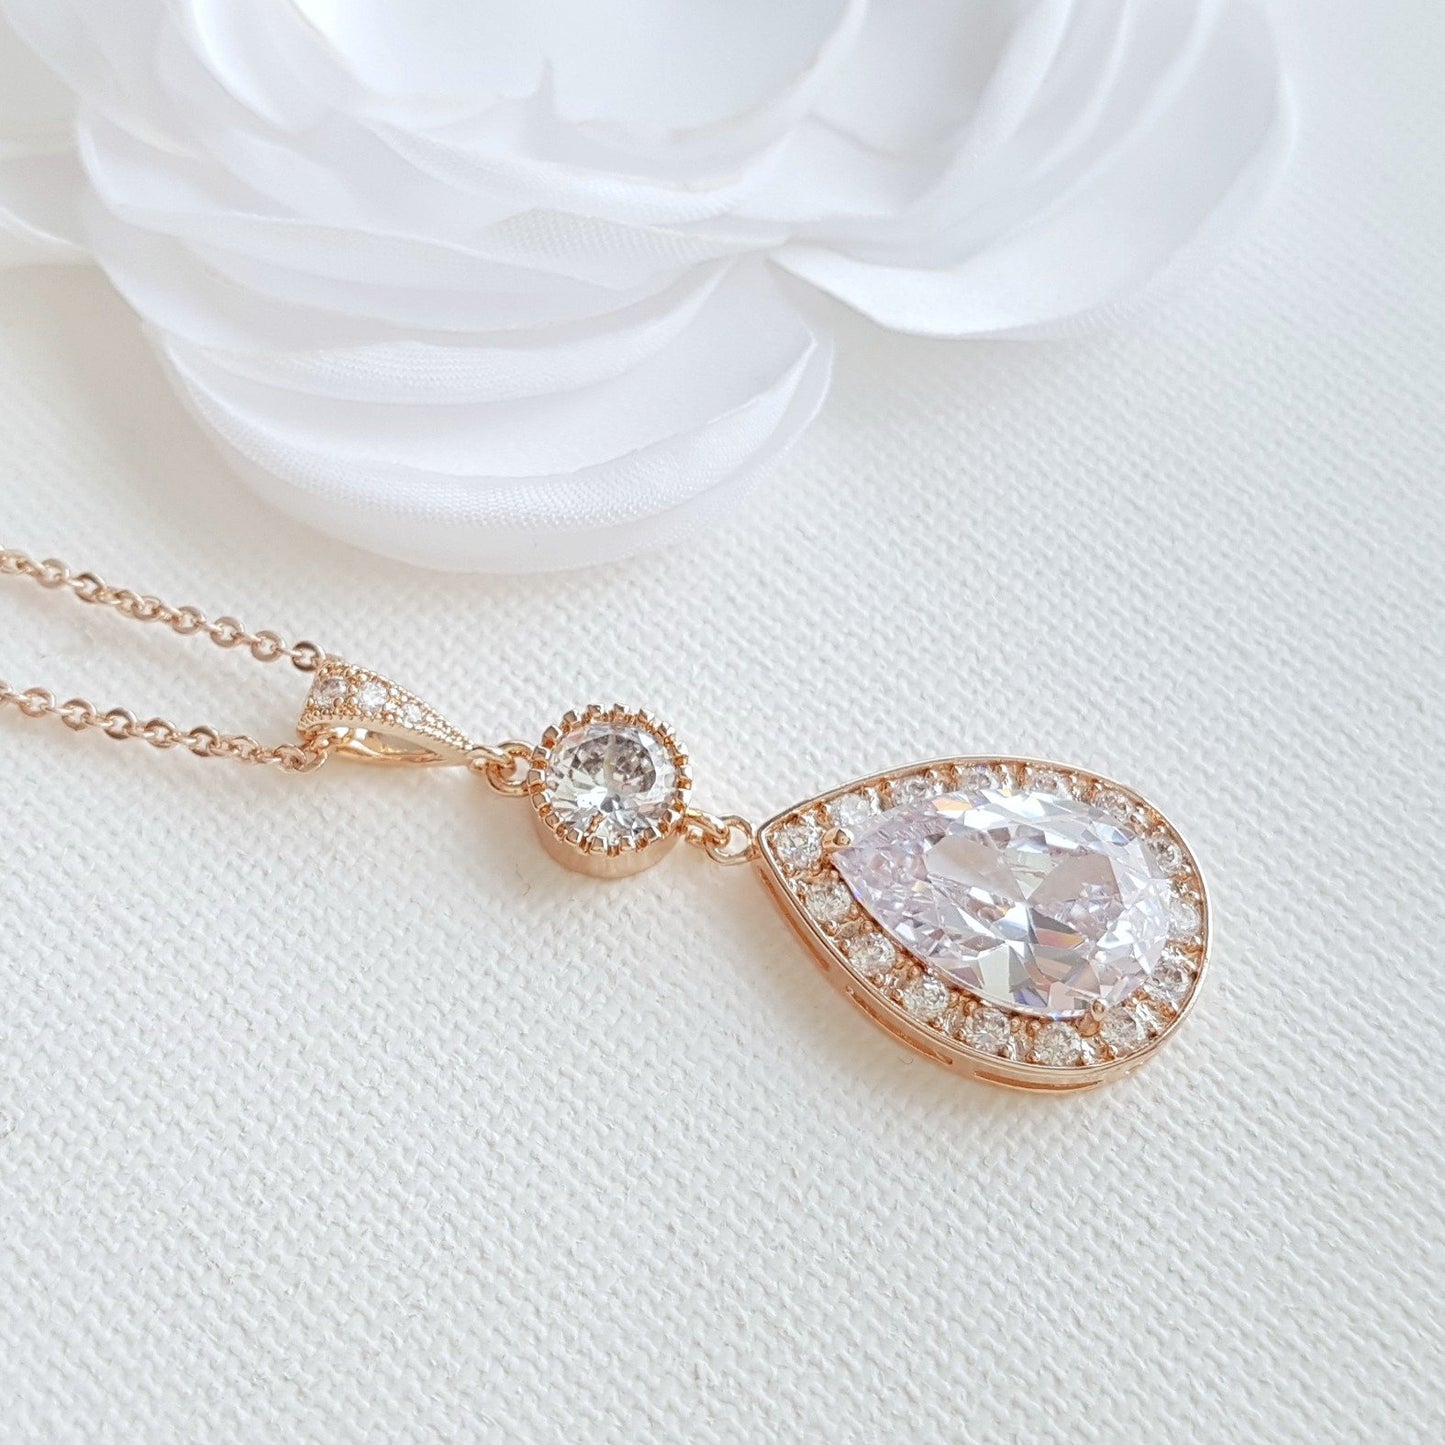 Round and Pear Shaped Drop Bridal Necklace-Evana